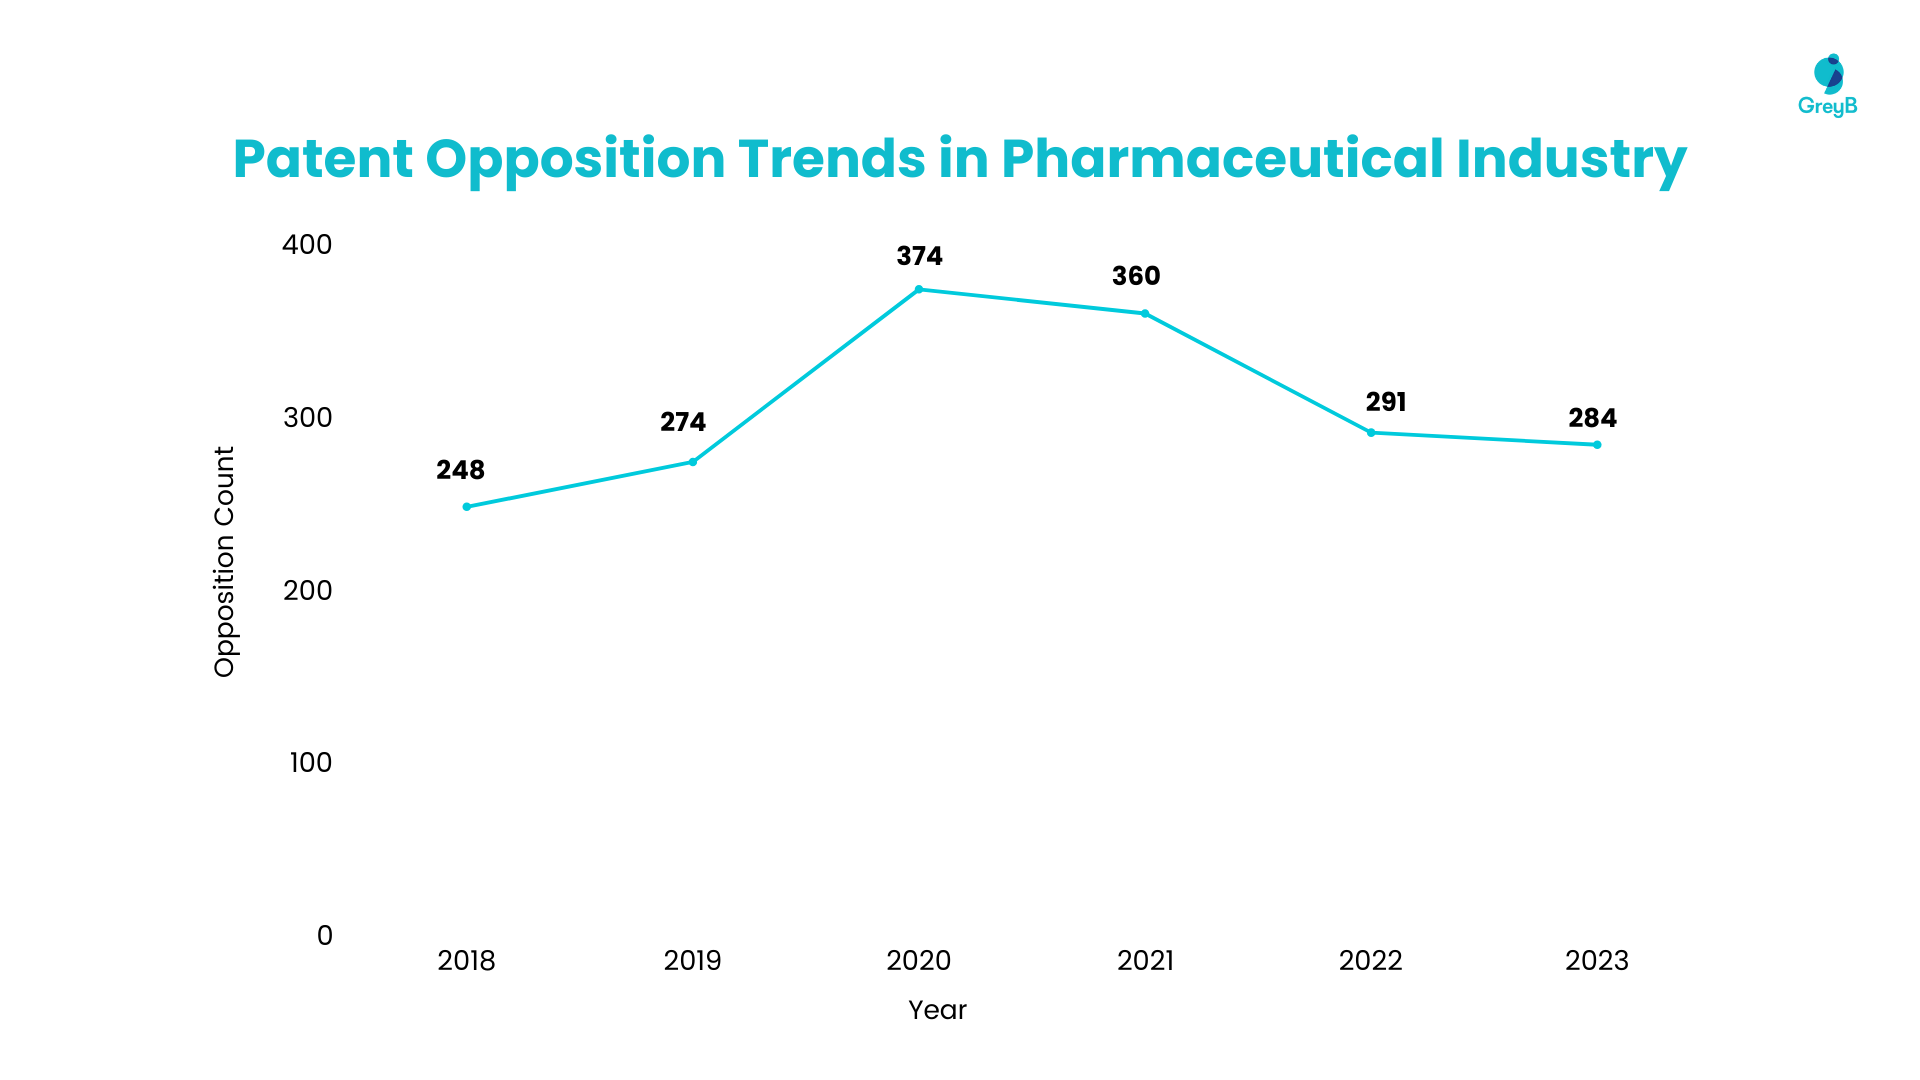 Patent Opposition Trends in Pharmaceutical Industry